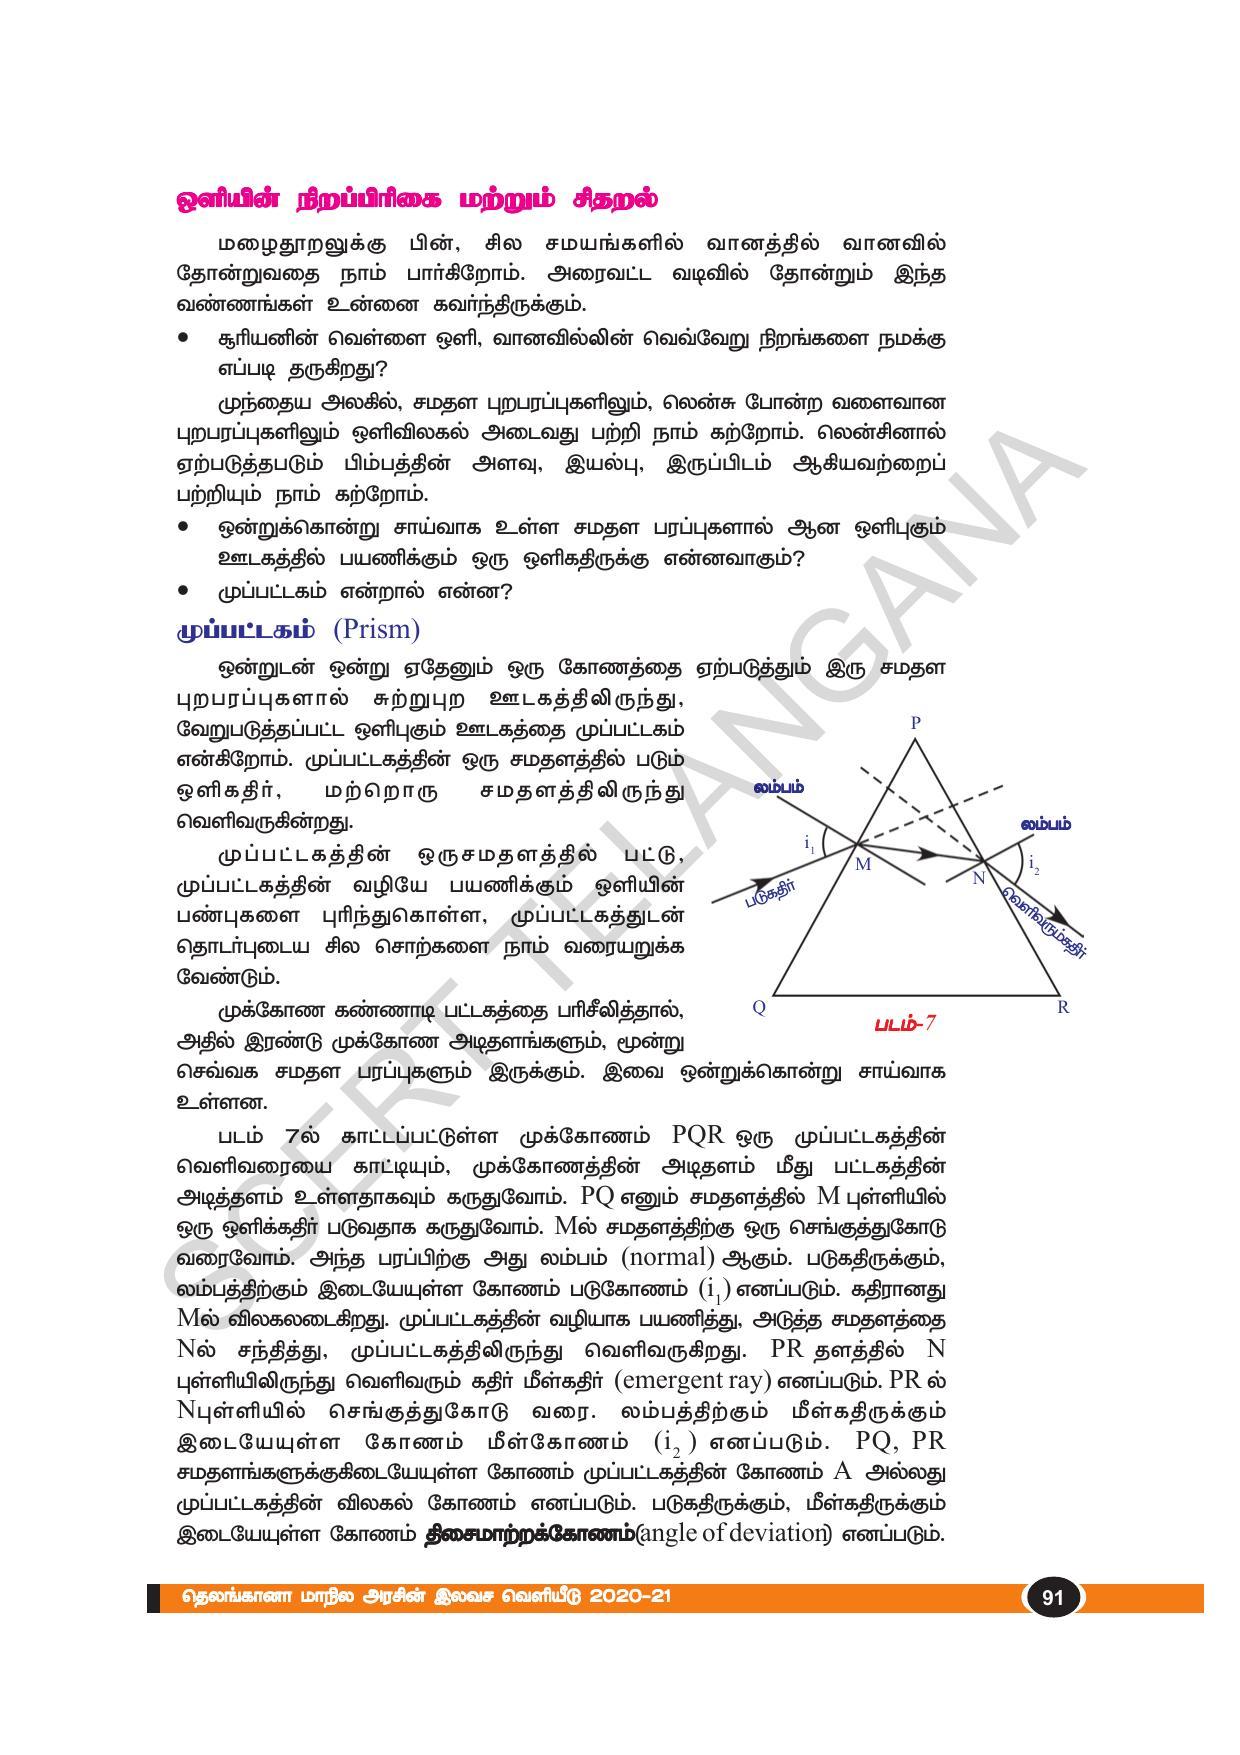 TS SCERT Class 10 Physical Science(Tamil Medium) Text Book - Page 103